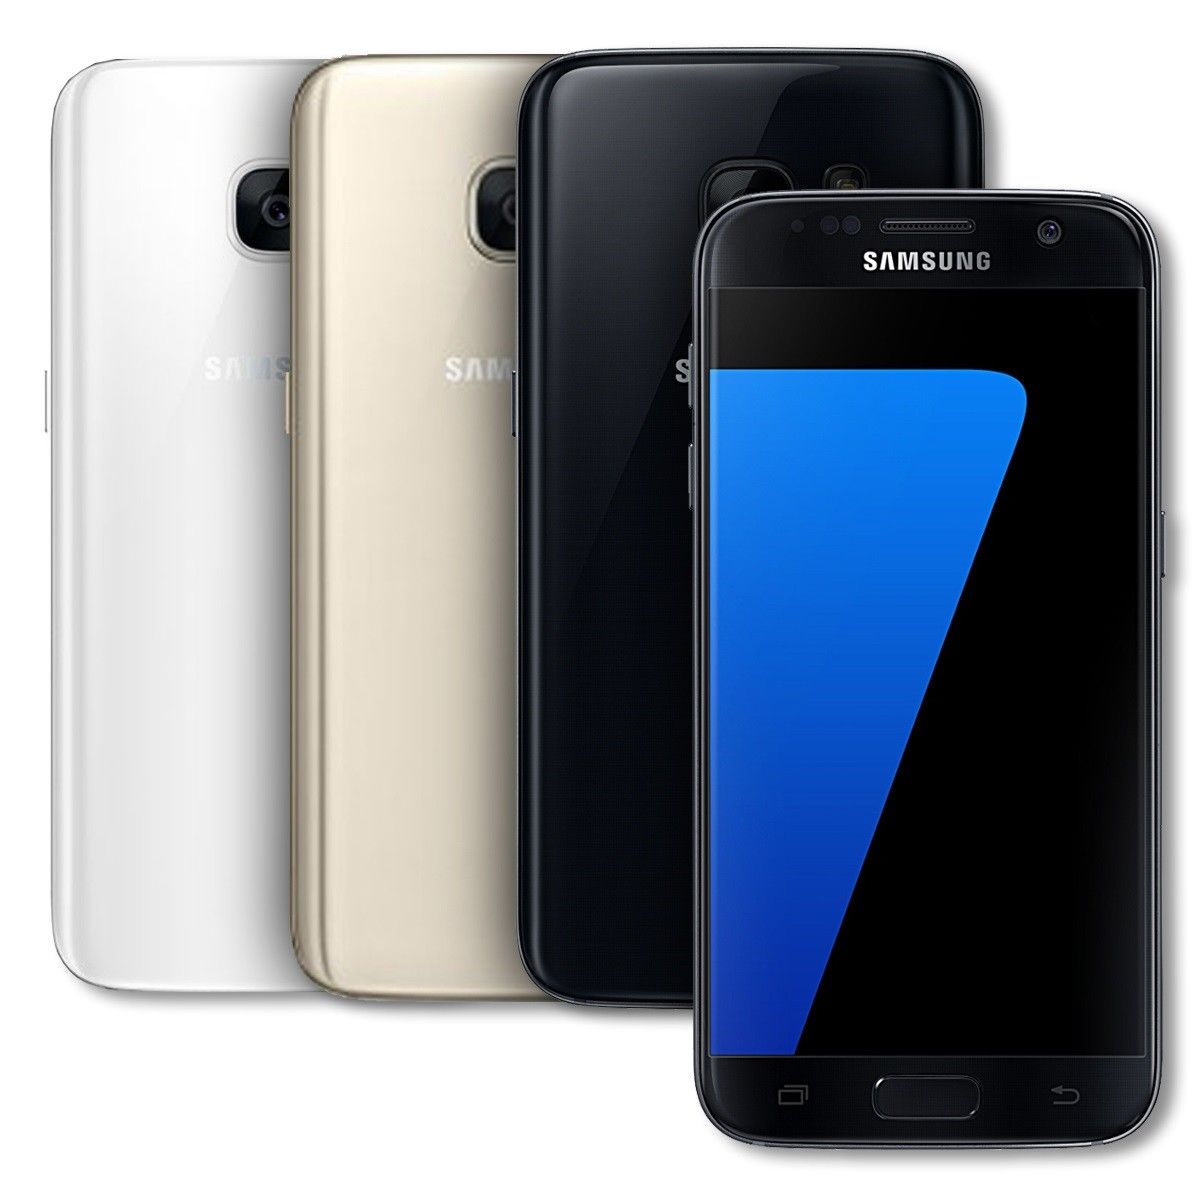 Limited time: Refurbished Samsung Galaxy S7 32GB smartphone for $164